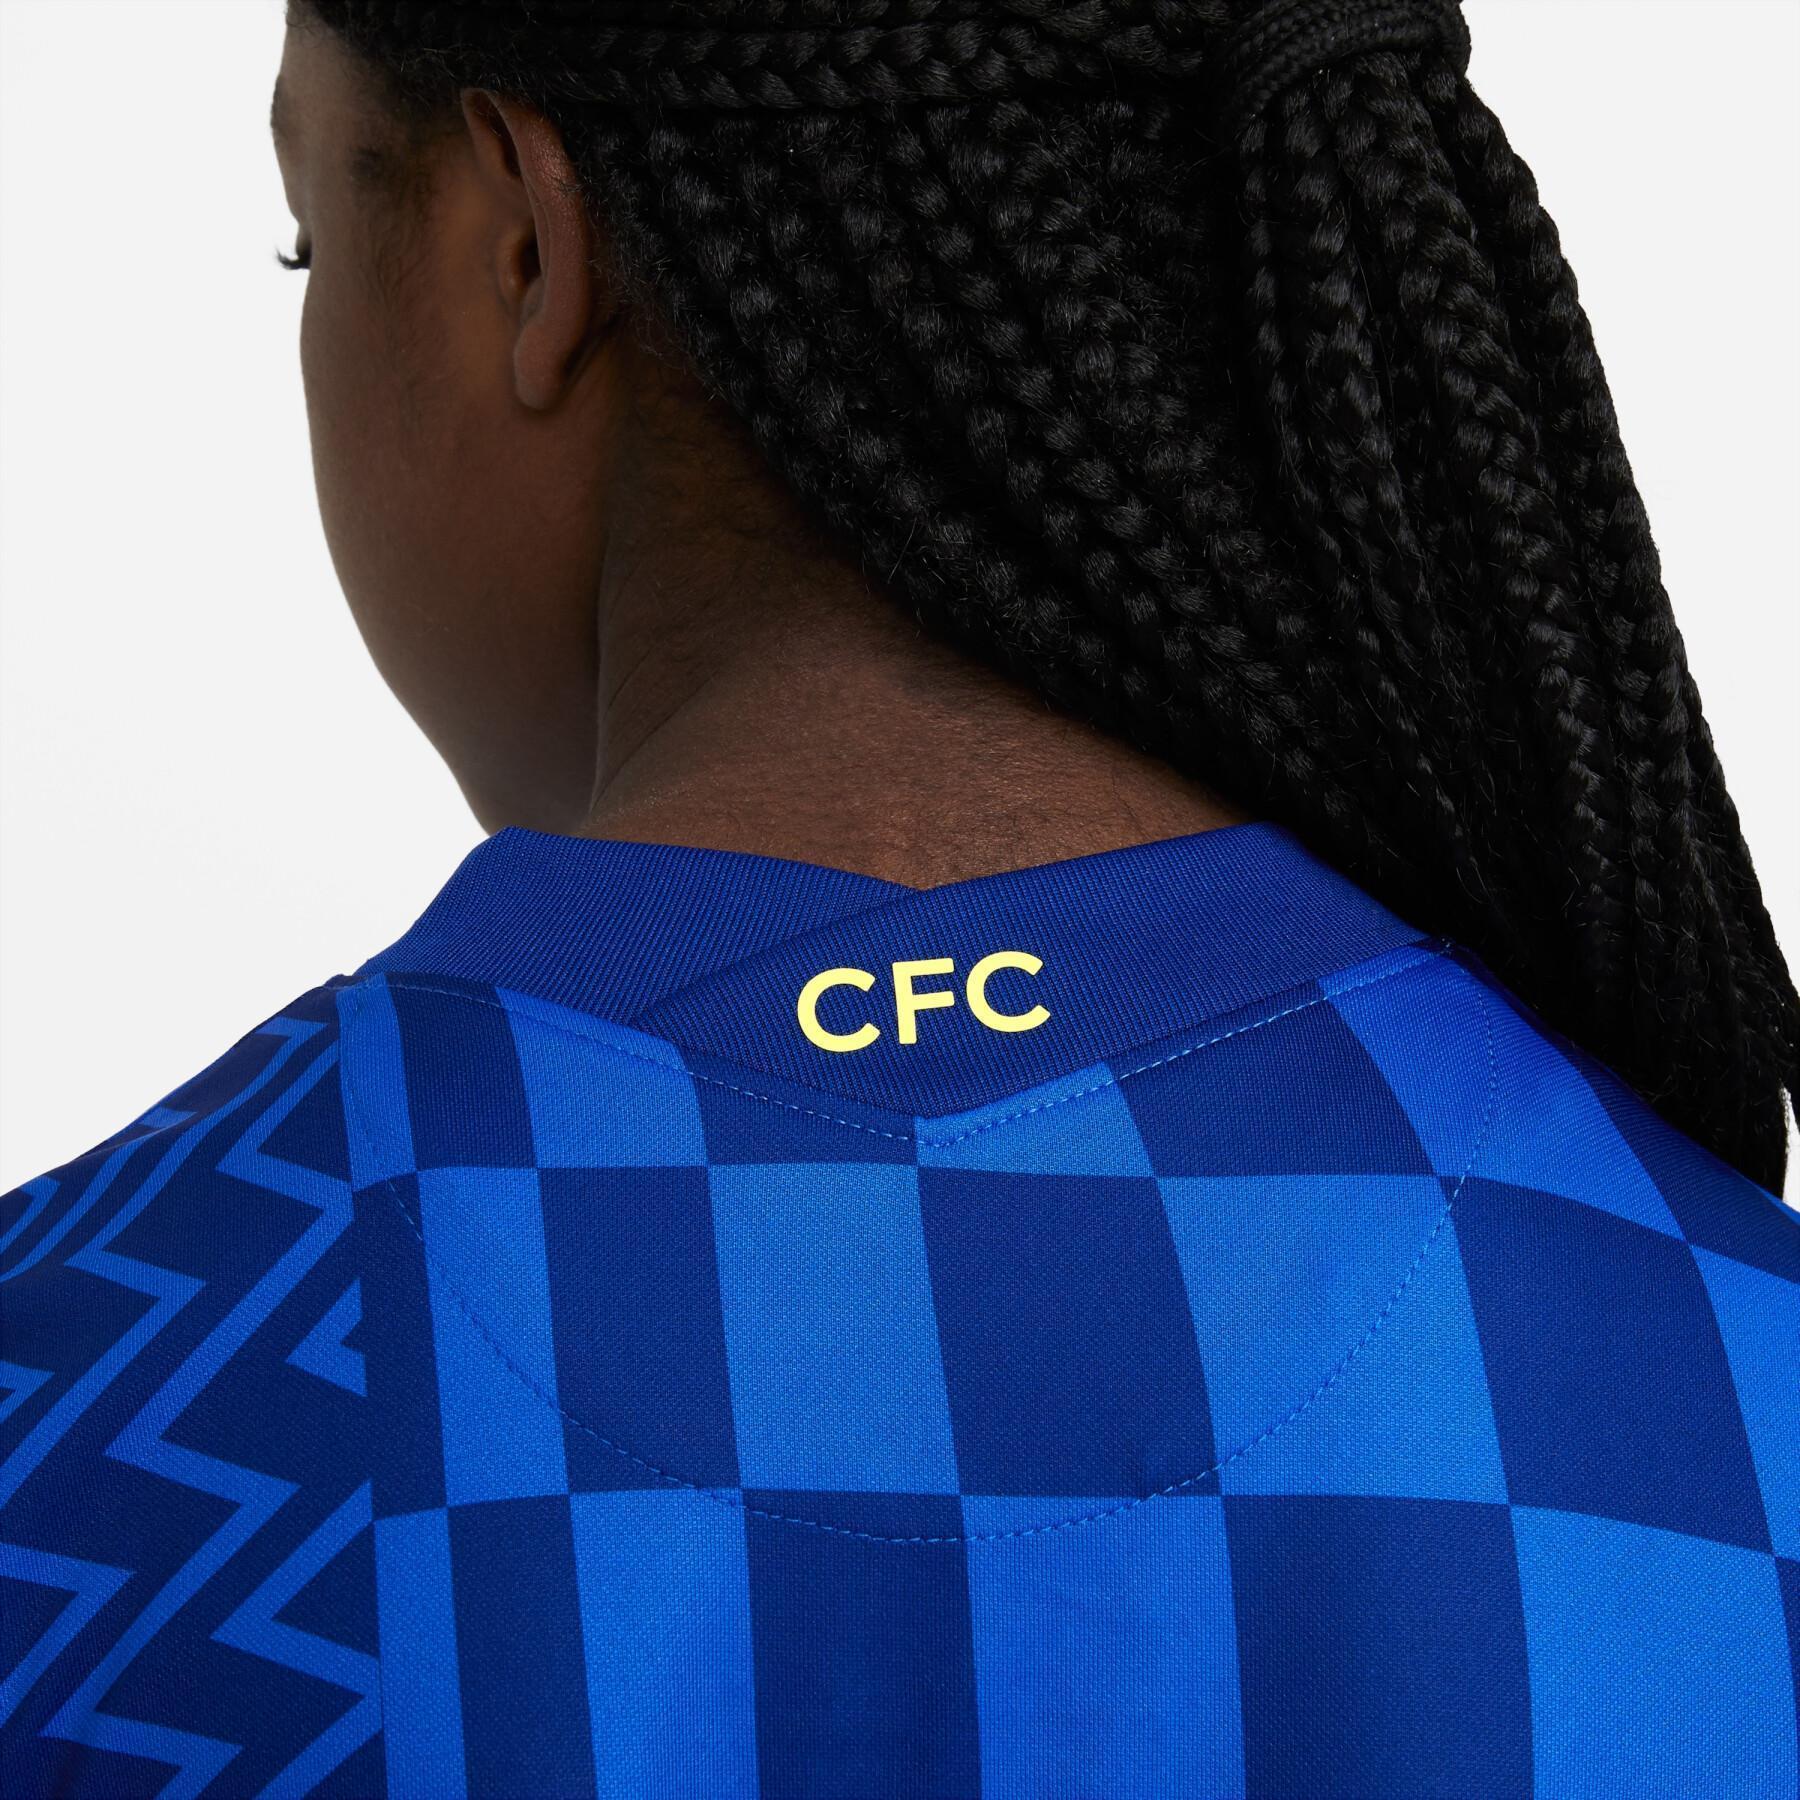 Home jersey child Chelsea 2021/22